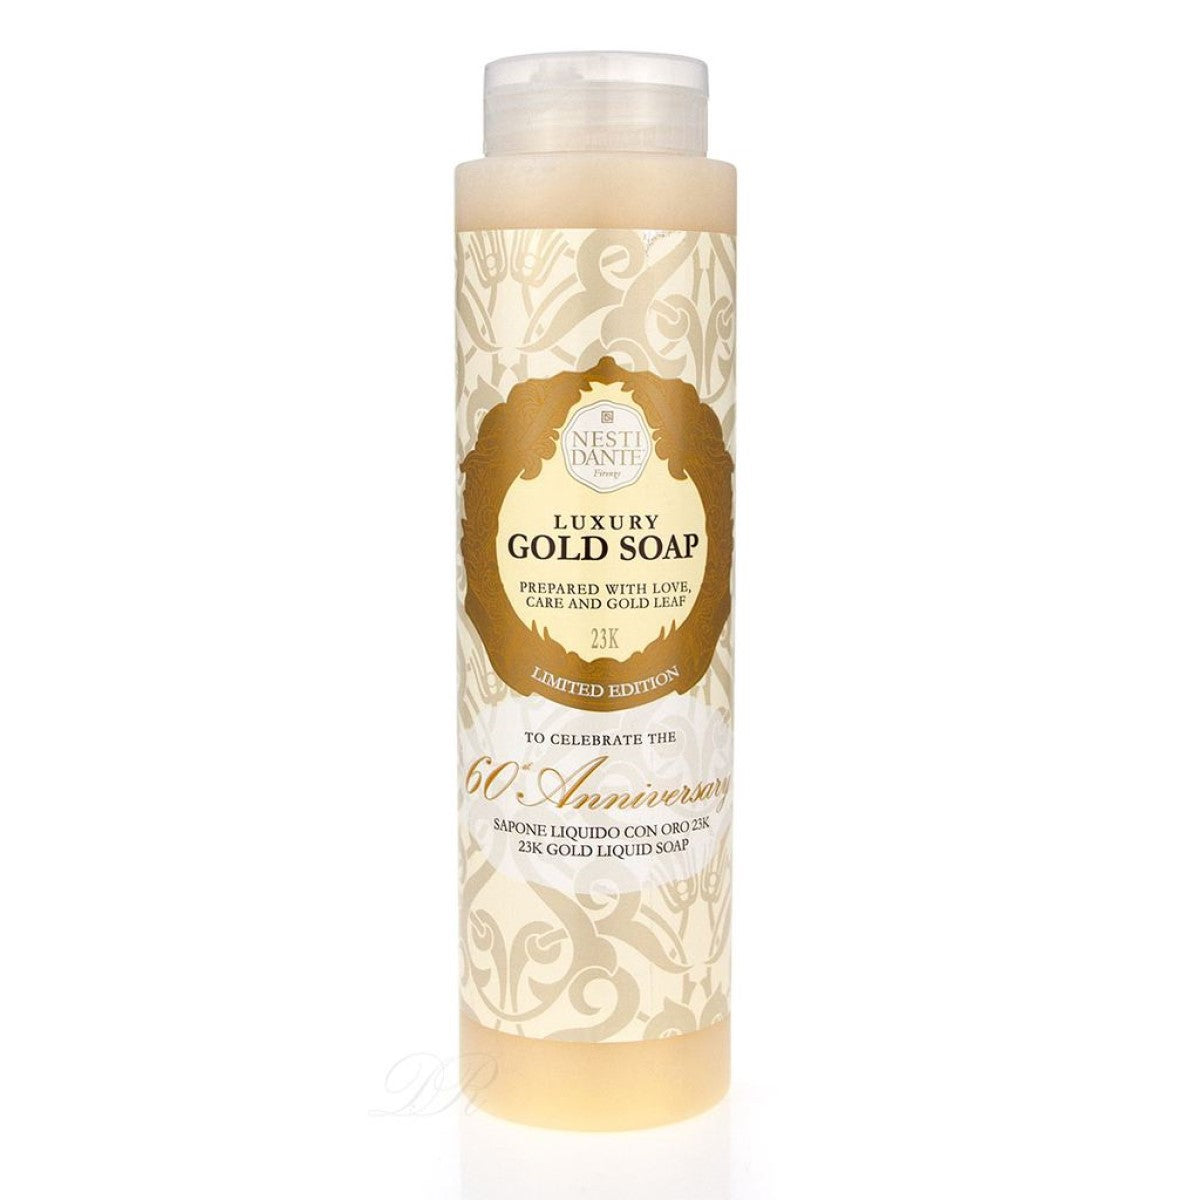 Primary Image of Luxury Gold Bath and Shower Gel